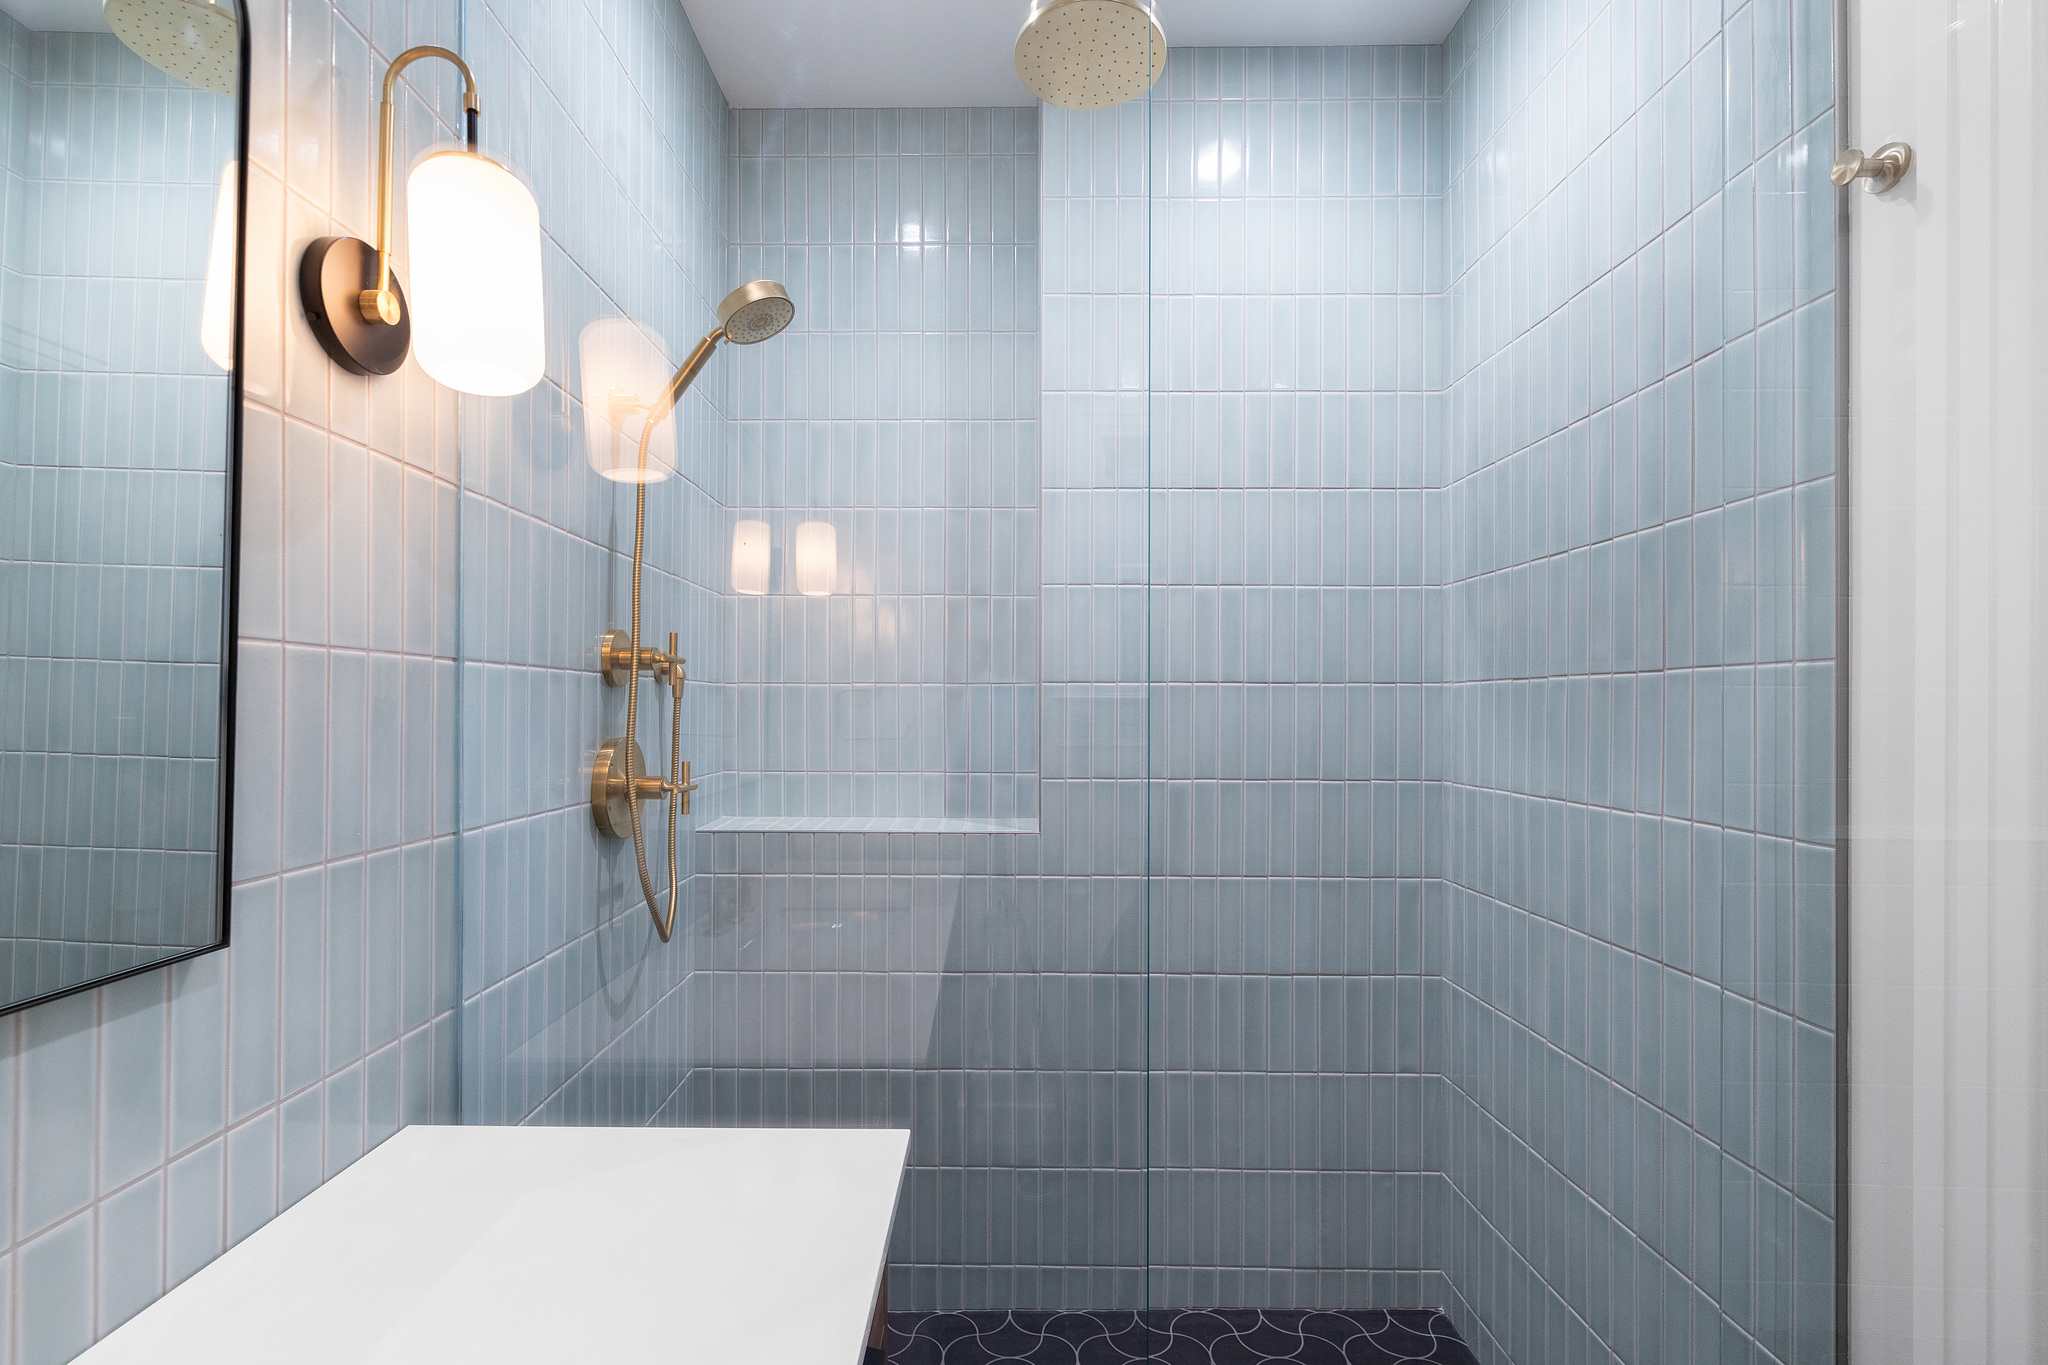 View of the walk-in glass shower with blue tile